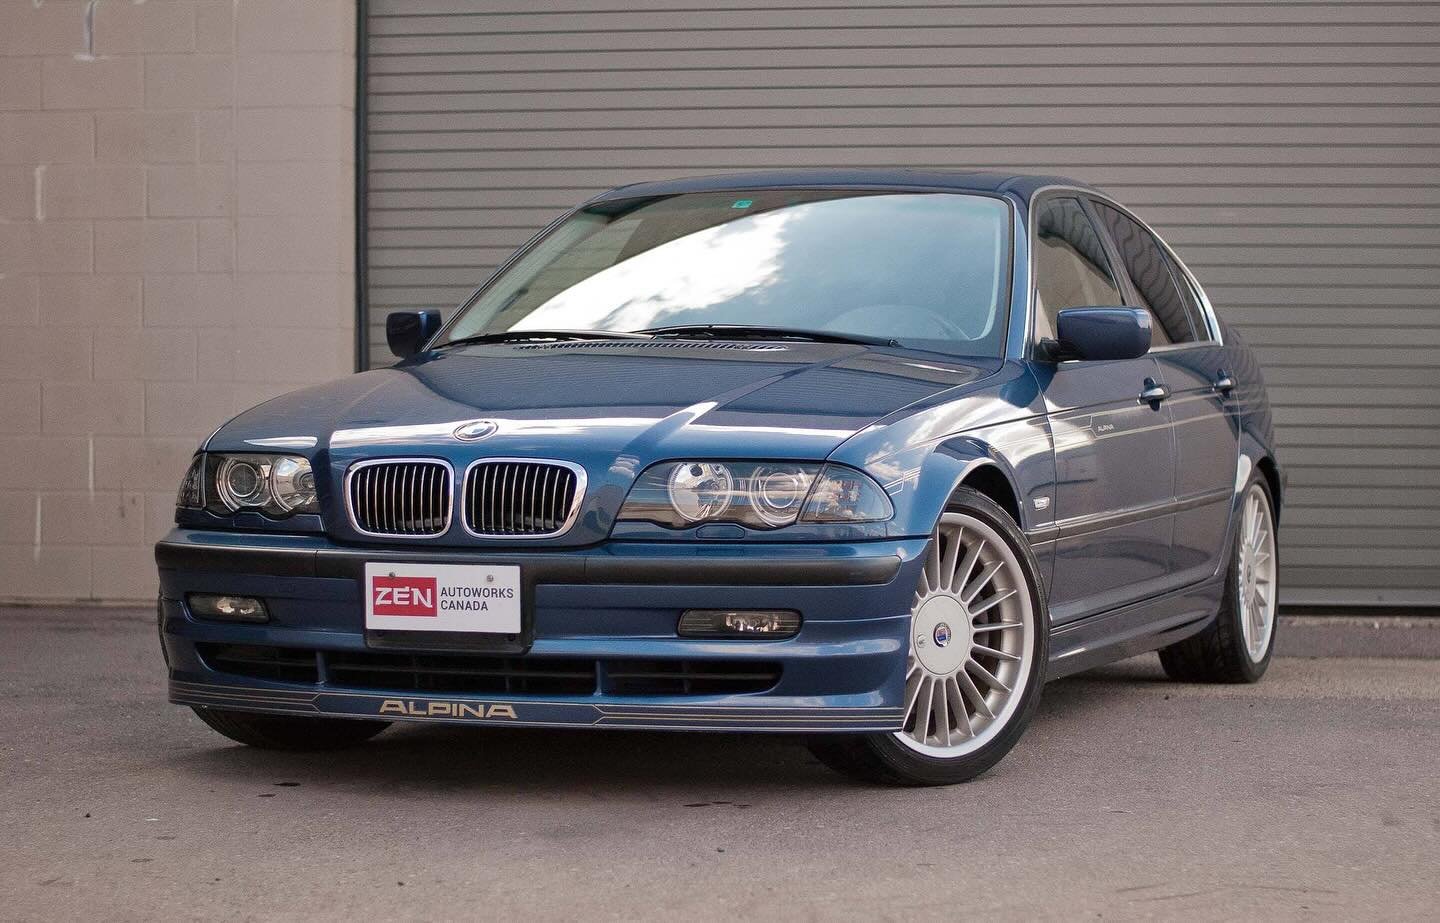 1999 Alpina B3 3.3 manual purchased direct from Japanese dealer auctions and imported to Canada for our client. 

These are next level cool. Japan has a lot of interesting Alpinas on the market. Not cheap cars but they do make a statement! 

________